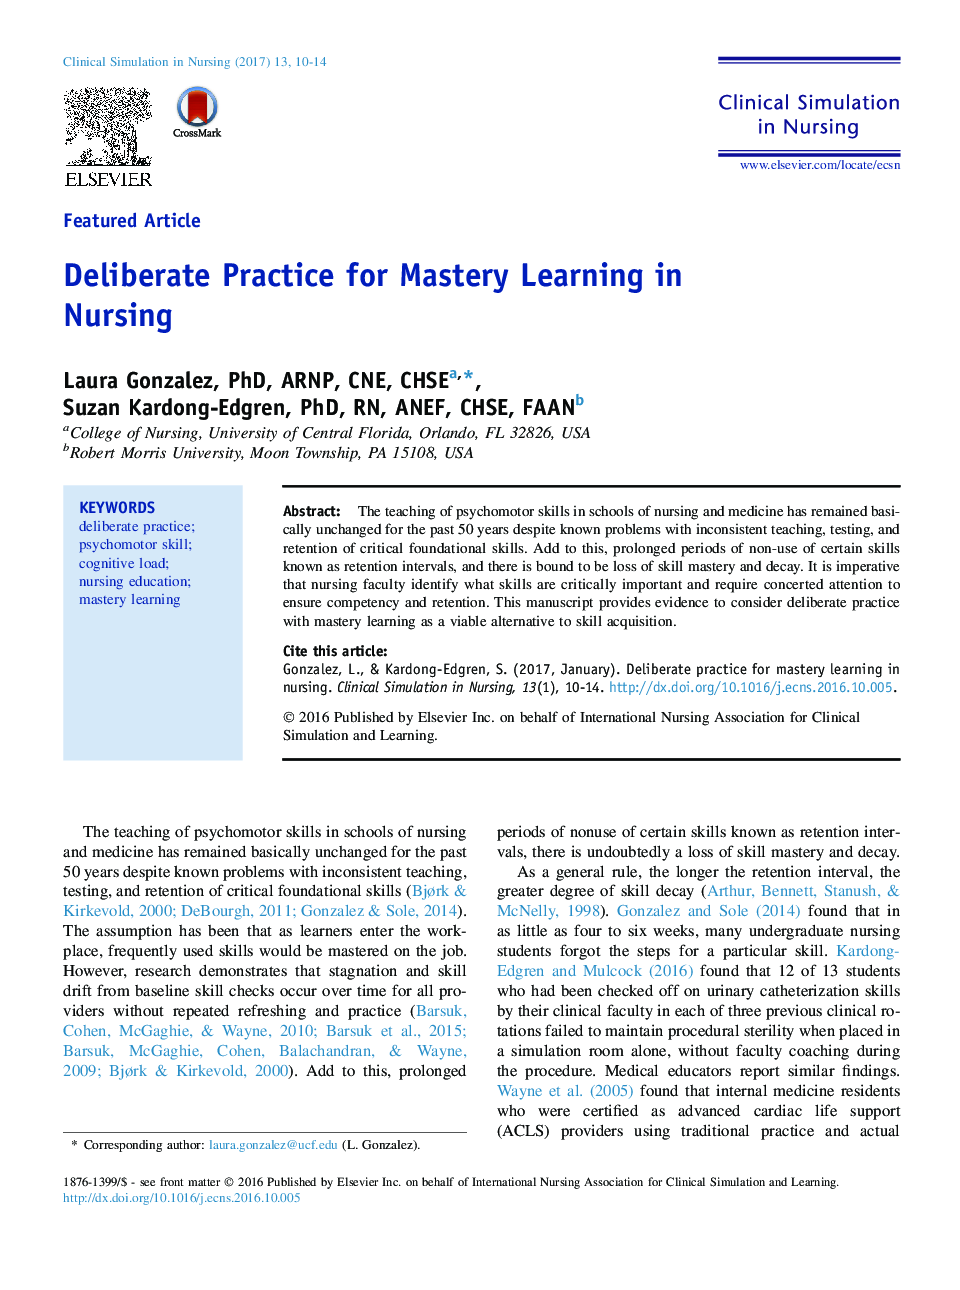 Deliberate Practice for Mastery Learning in Nursing